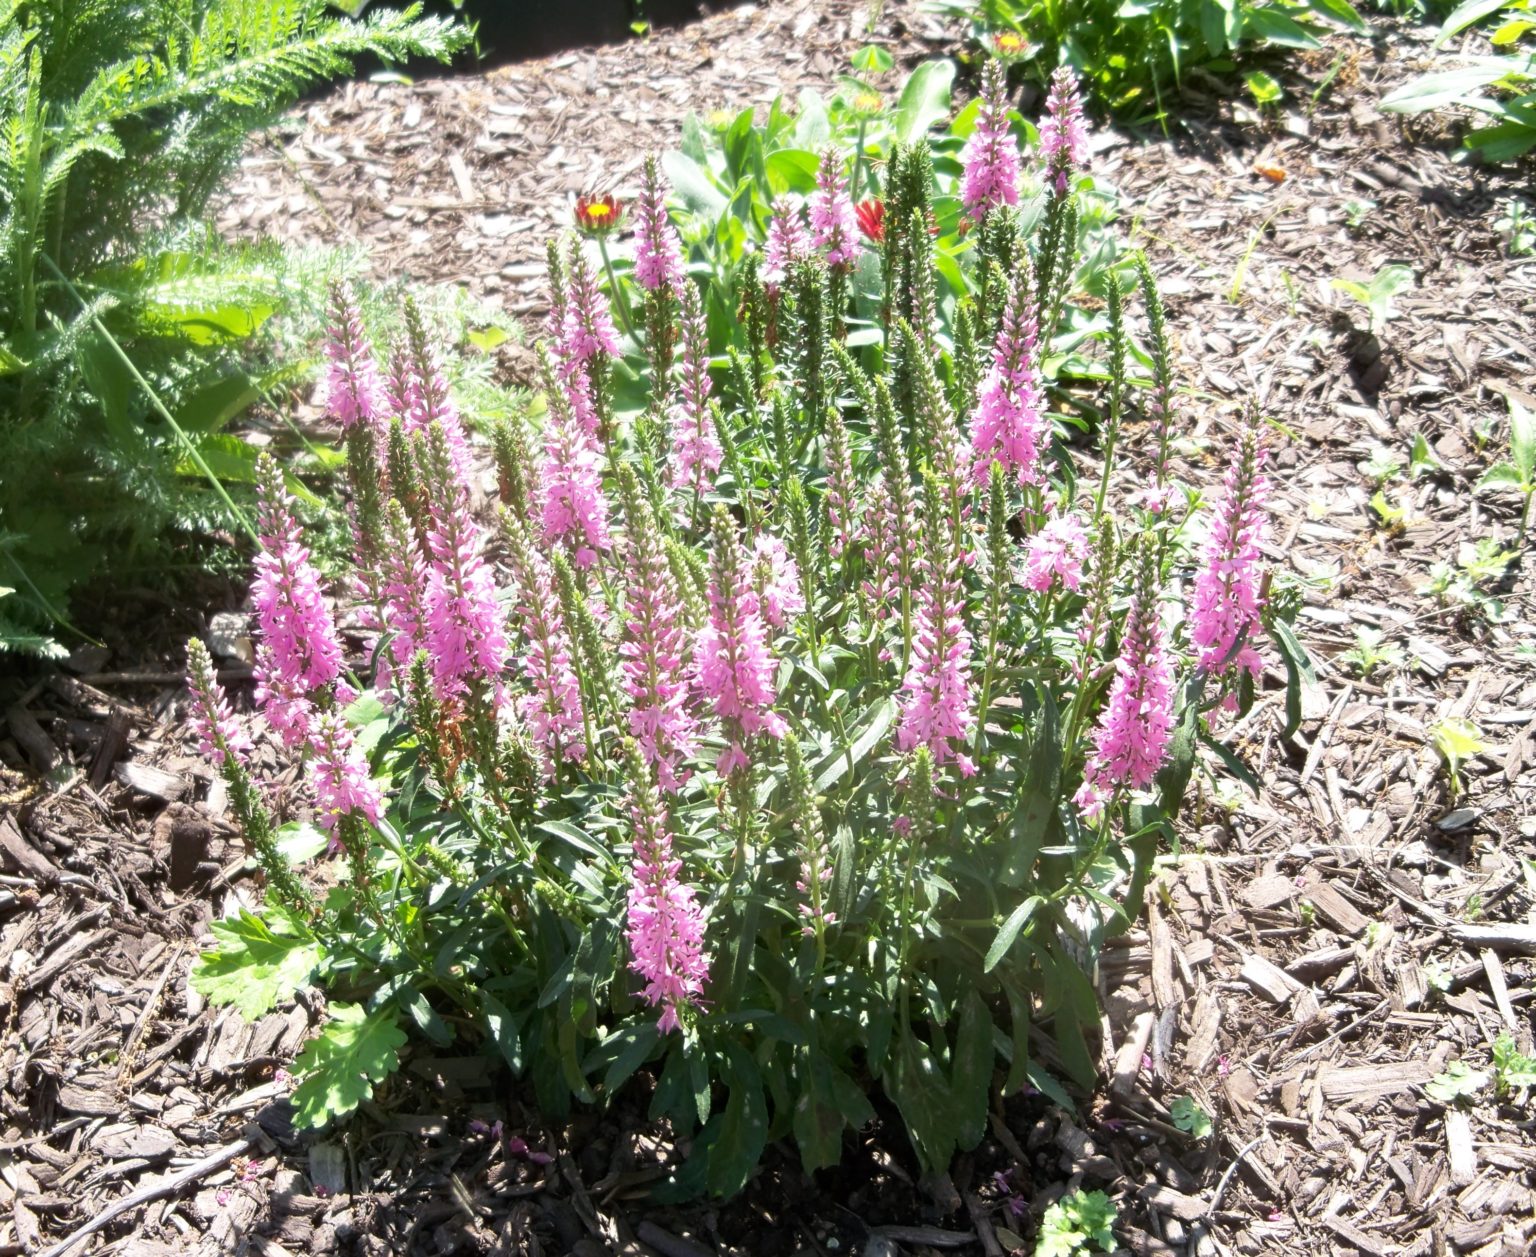 Recommended deer resistant perennials for the Northeast